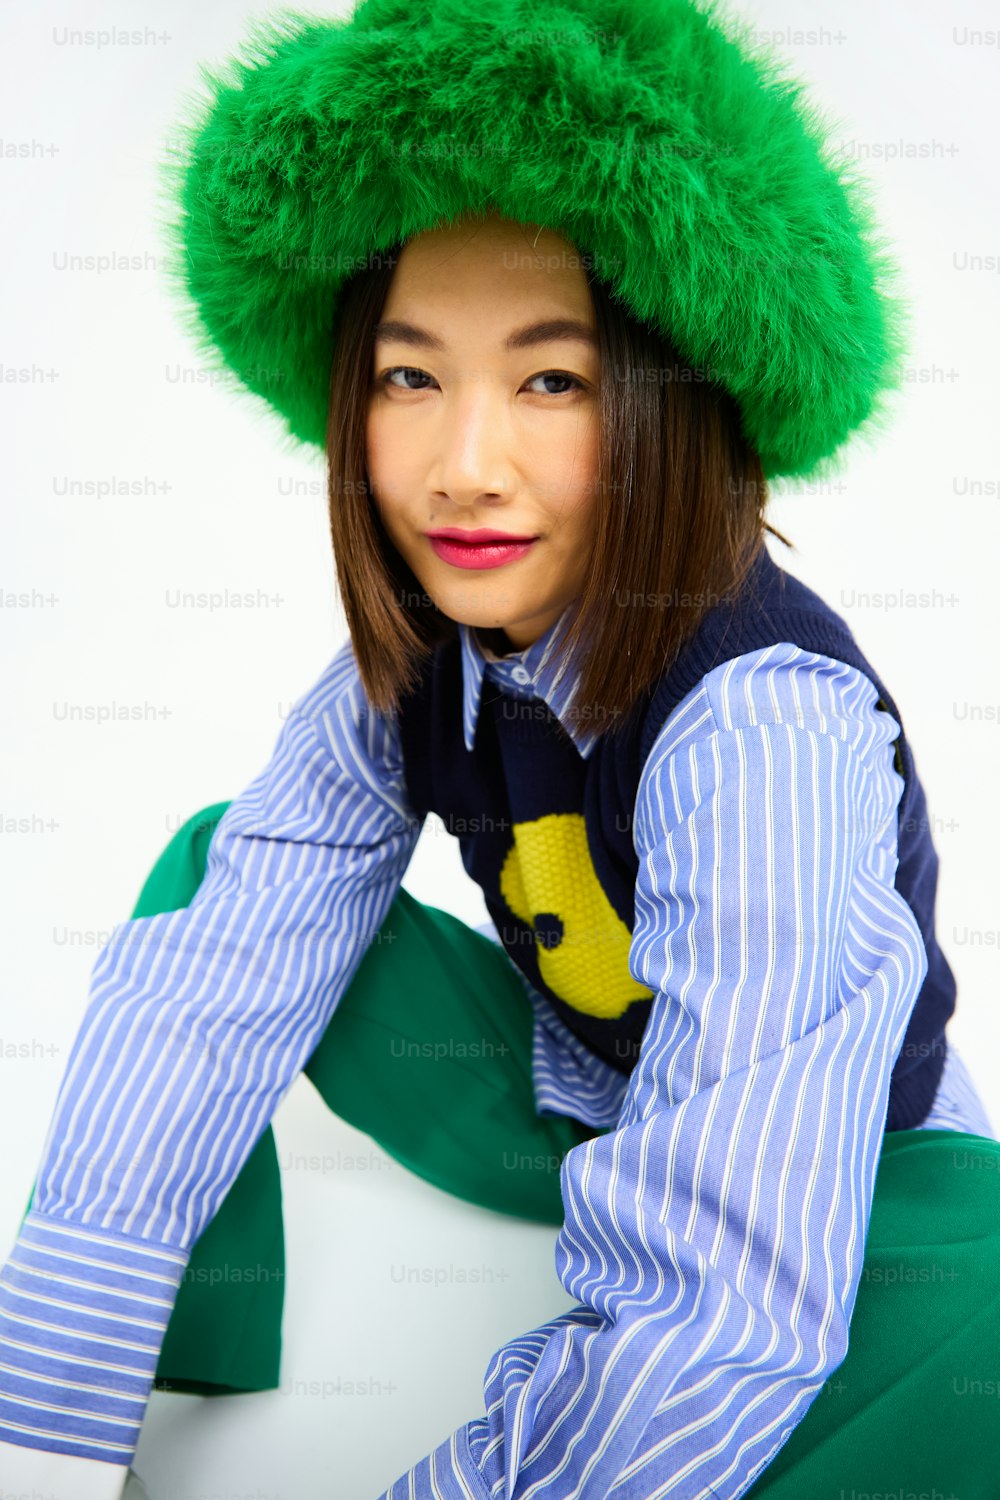 a woman wearing a green hat and striped shirt